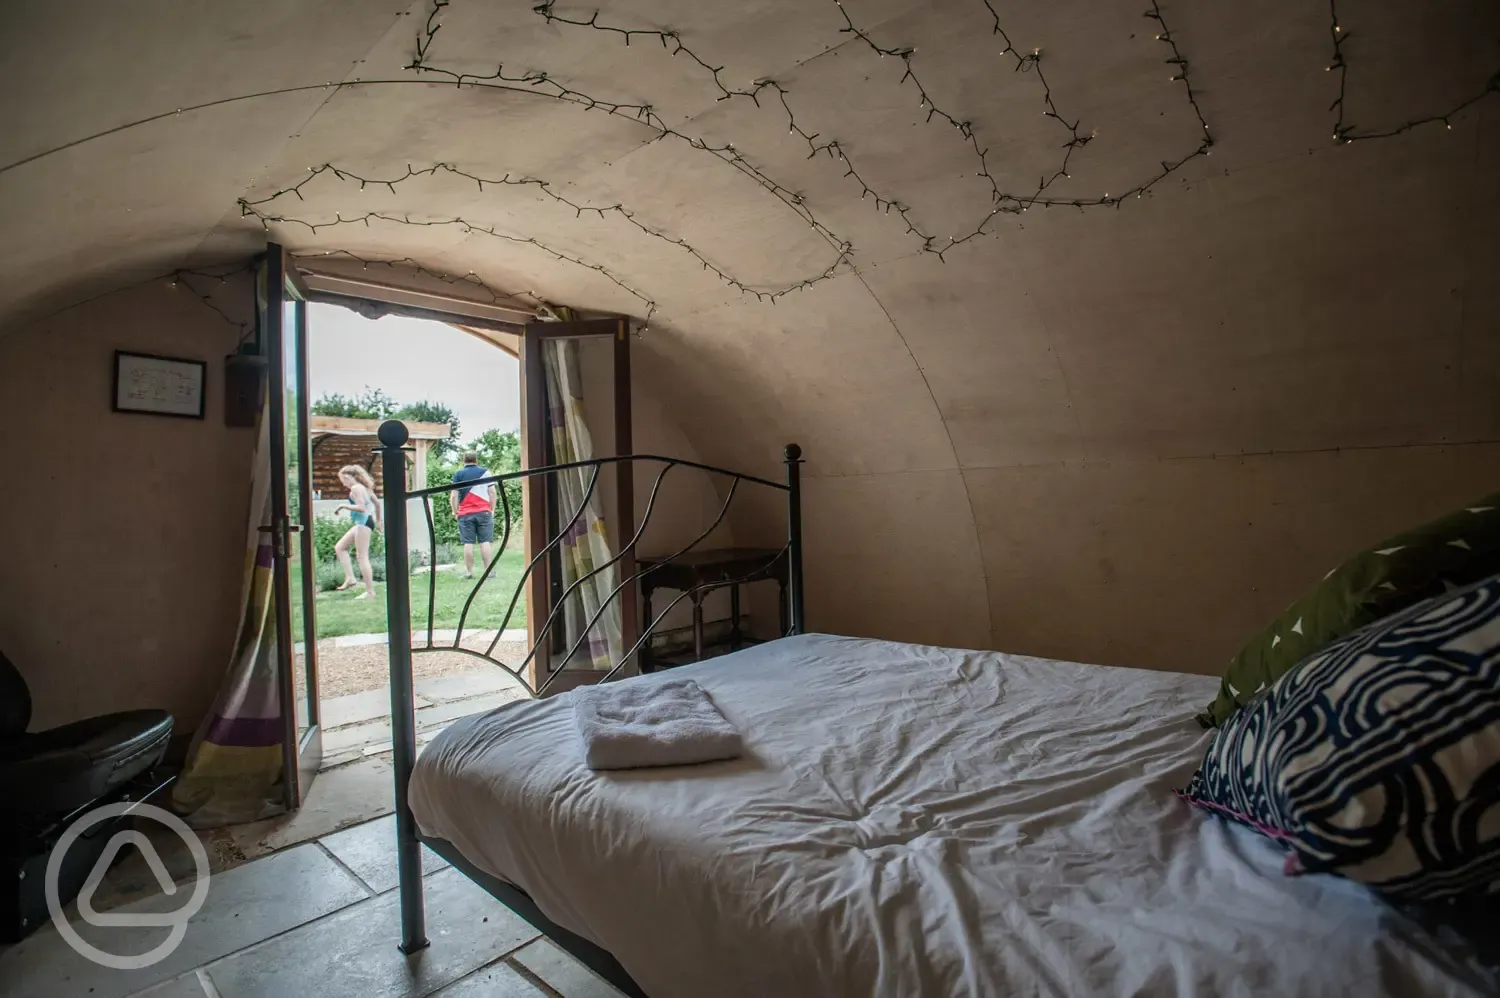 Inside the glamping burrow